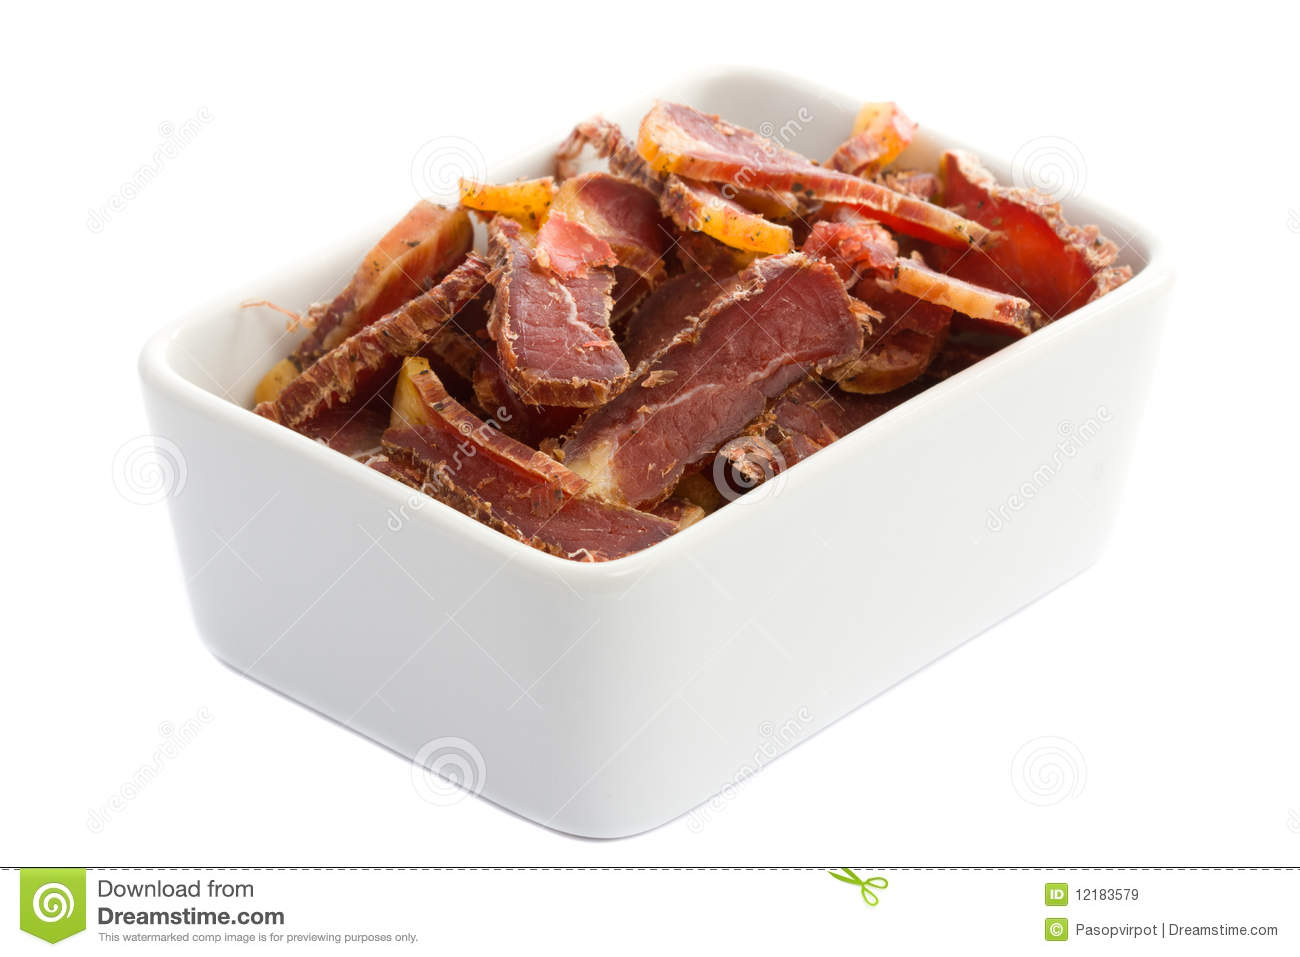 Biltong South African Dried Meat Snack In White Bowl Isolated On Pure